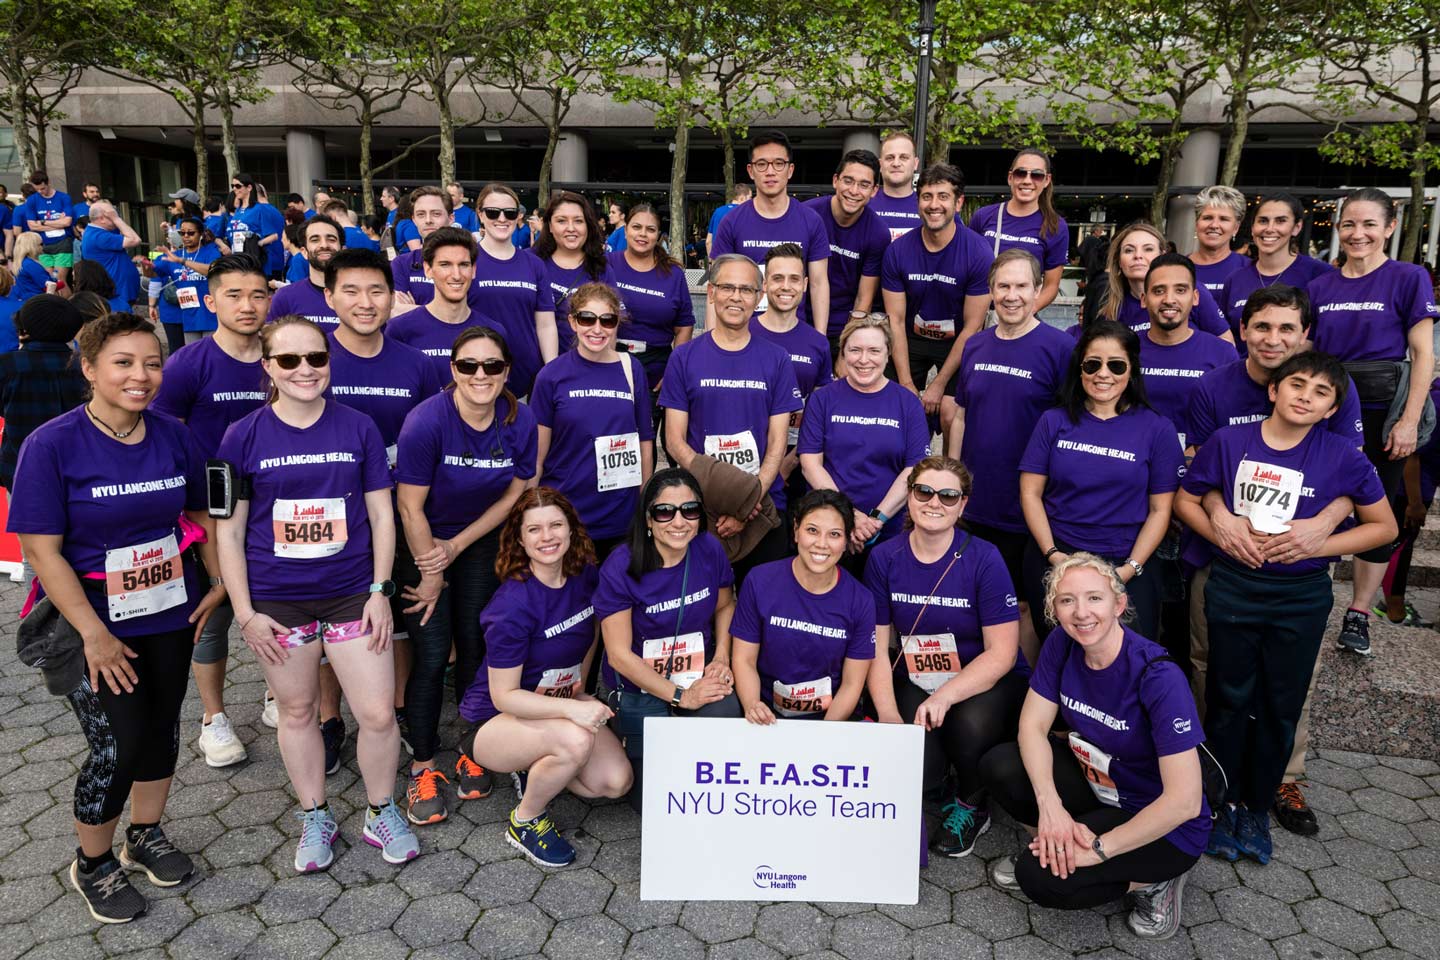 Neurology Residents and Faculty Participate in the American Heart Association Walk/Run